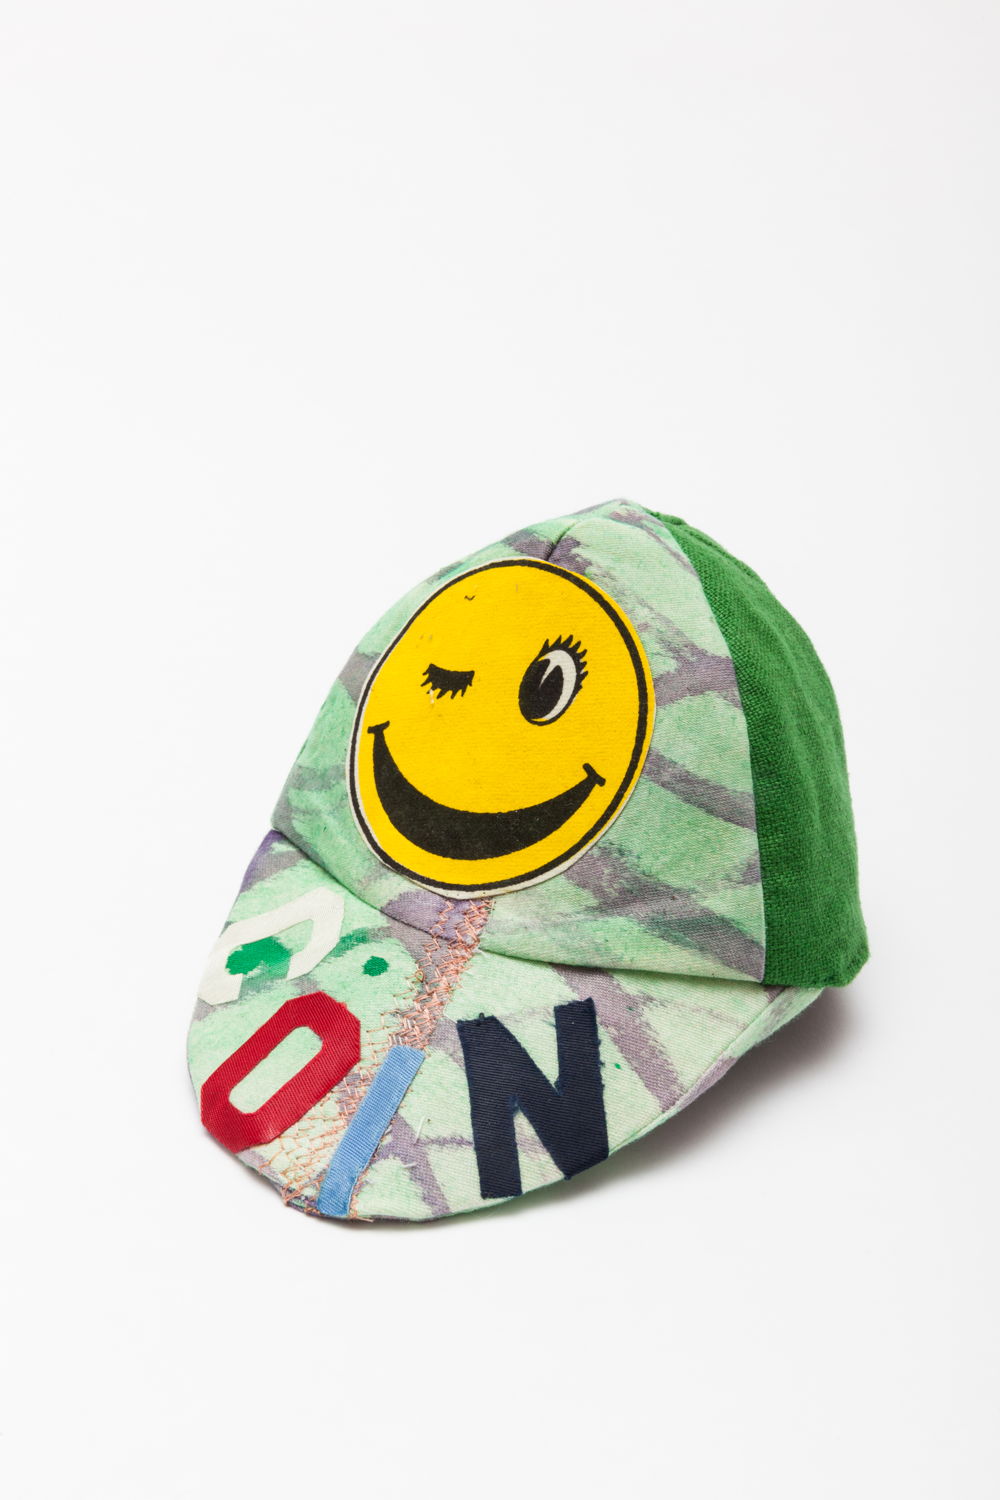 Francis Upritchard, Coin Hat, 2016. Medium Fabric, aluminium mesh, leather with buckle, bronze badge. Courtesy of the artist and Kate Macgarry, Londen